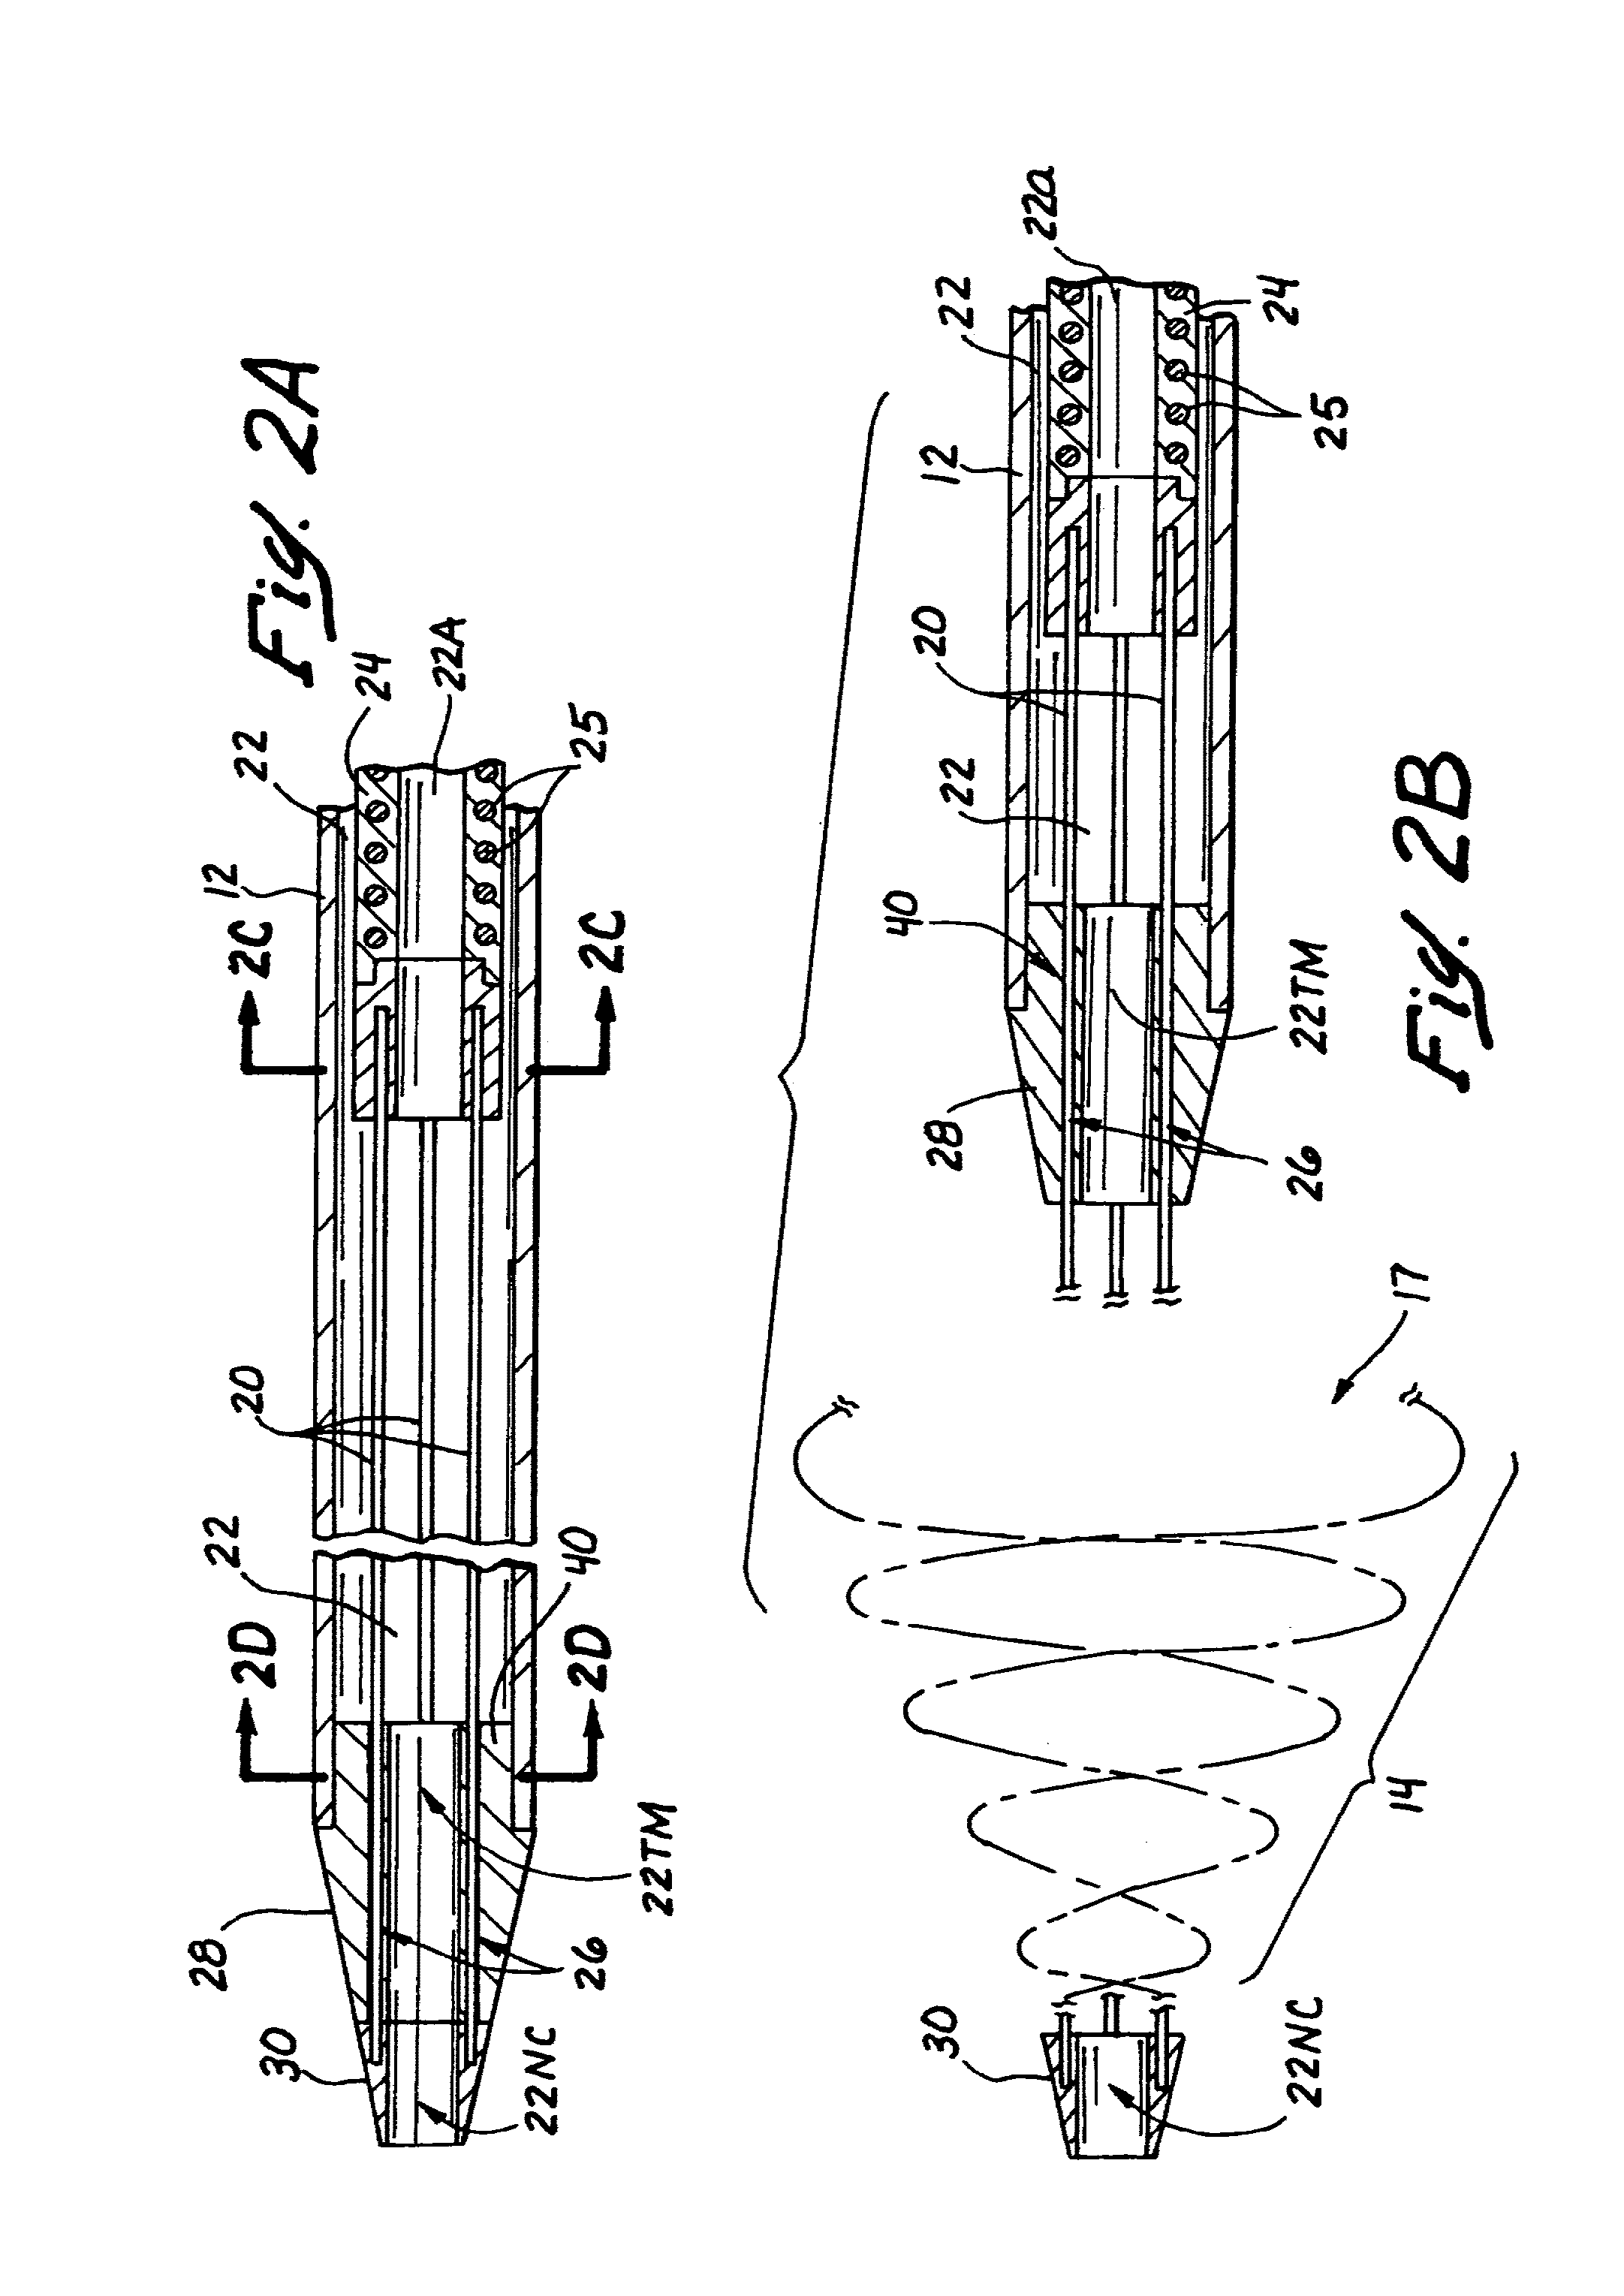 Embolectomy Catheters And Methods For Treating Stroke And Other Small Vessel Thromboembolic Disorders